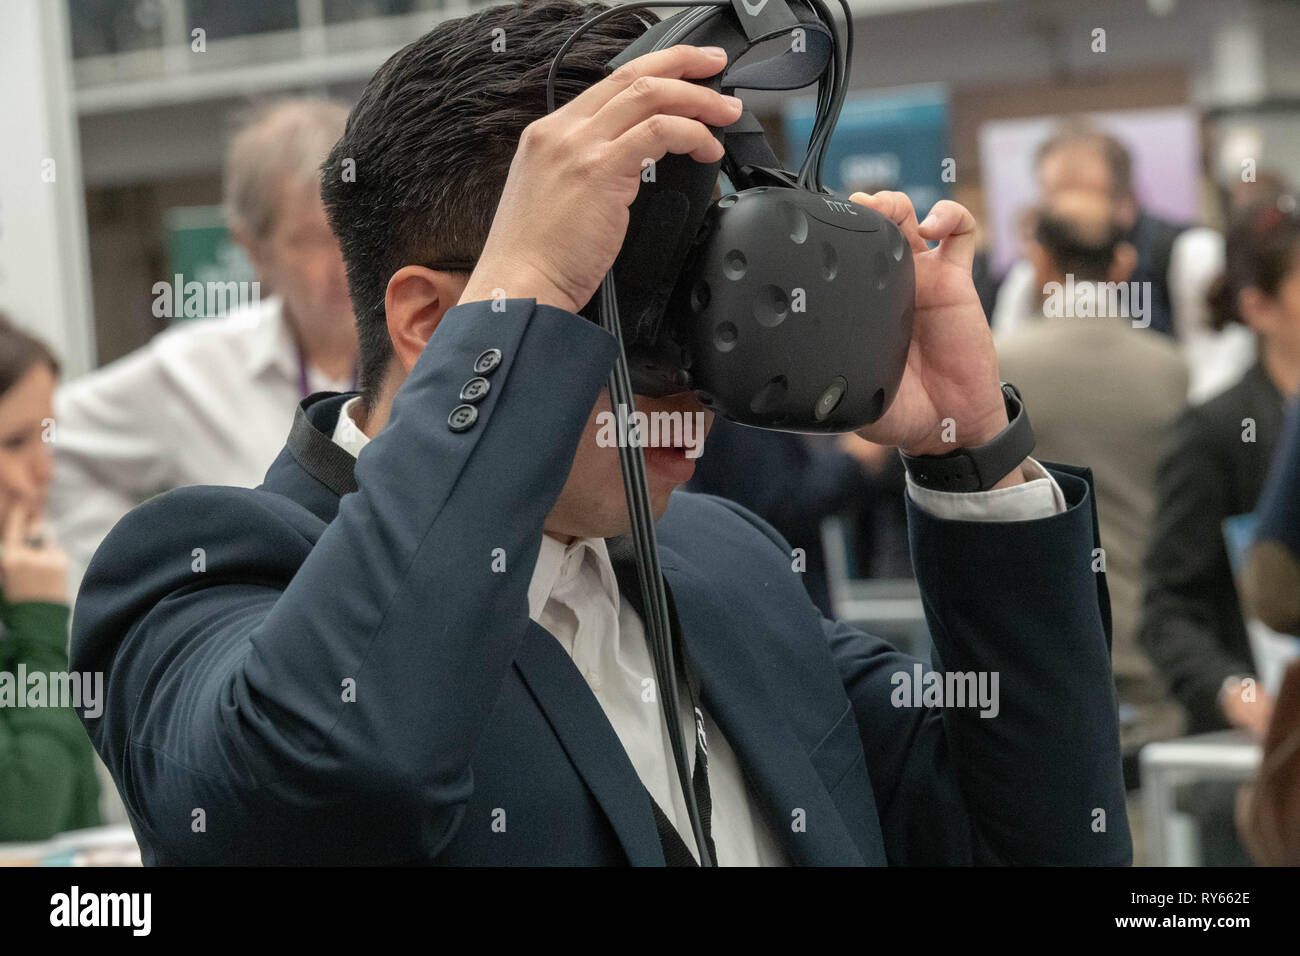 London, UK. 12th March 2019. A vistor tries out a VR Headset at The Wearable Technology Show at the Business Design Centre, The largest dedicated event for connected technology, the show features innovative products from start-ups as well as products from major technology companies and includes the latest in virtual reality and augmented reality devices and software Credit: Ian Davidson/Alamy Live News Stock Photo